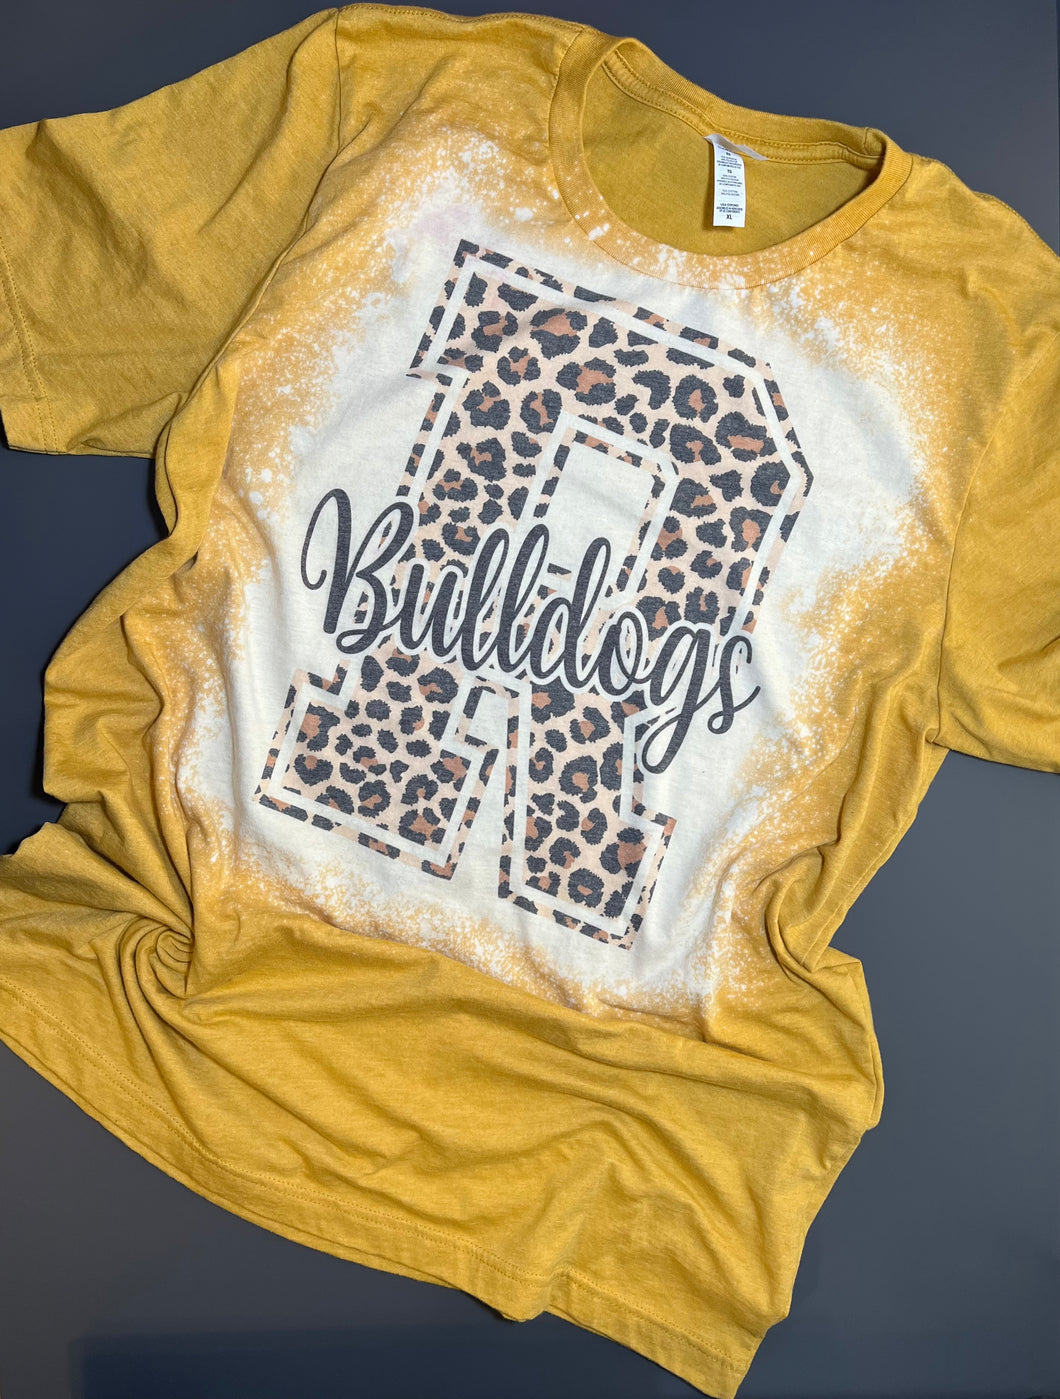 Leopard R Bulldogs bleached graphic tee long sleeve crew or hoodie - Mavictoria Designs Hot Press Express